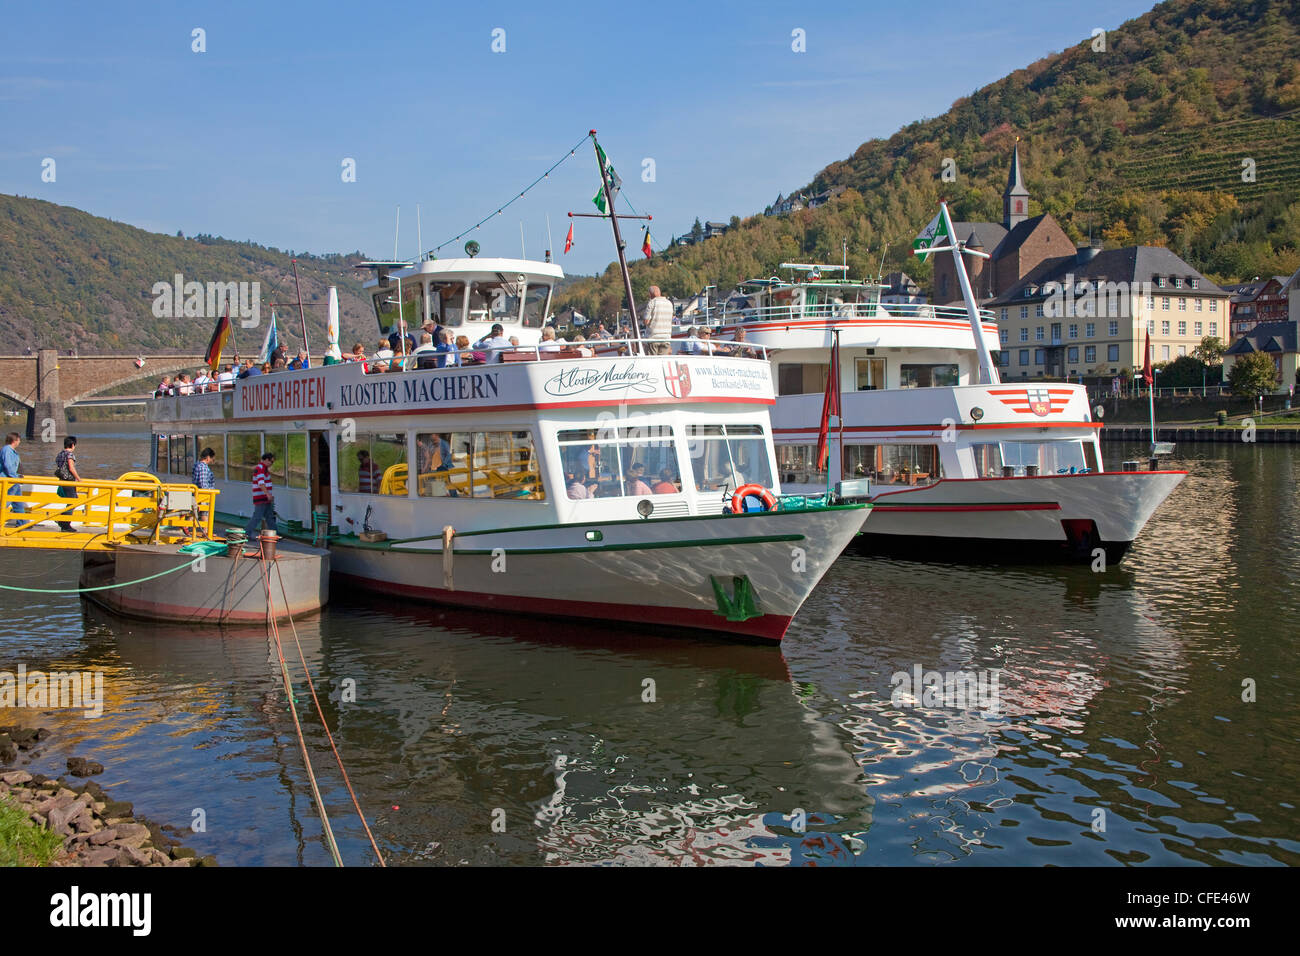 Moselle excursion ships at landing stage, sightseeing tours on Moselle river, Cochem, Rhineland-Palatinate, Germany, Europe Stock Photo